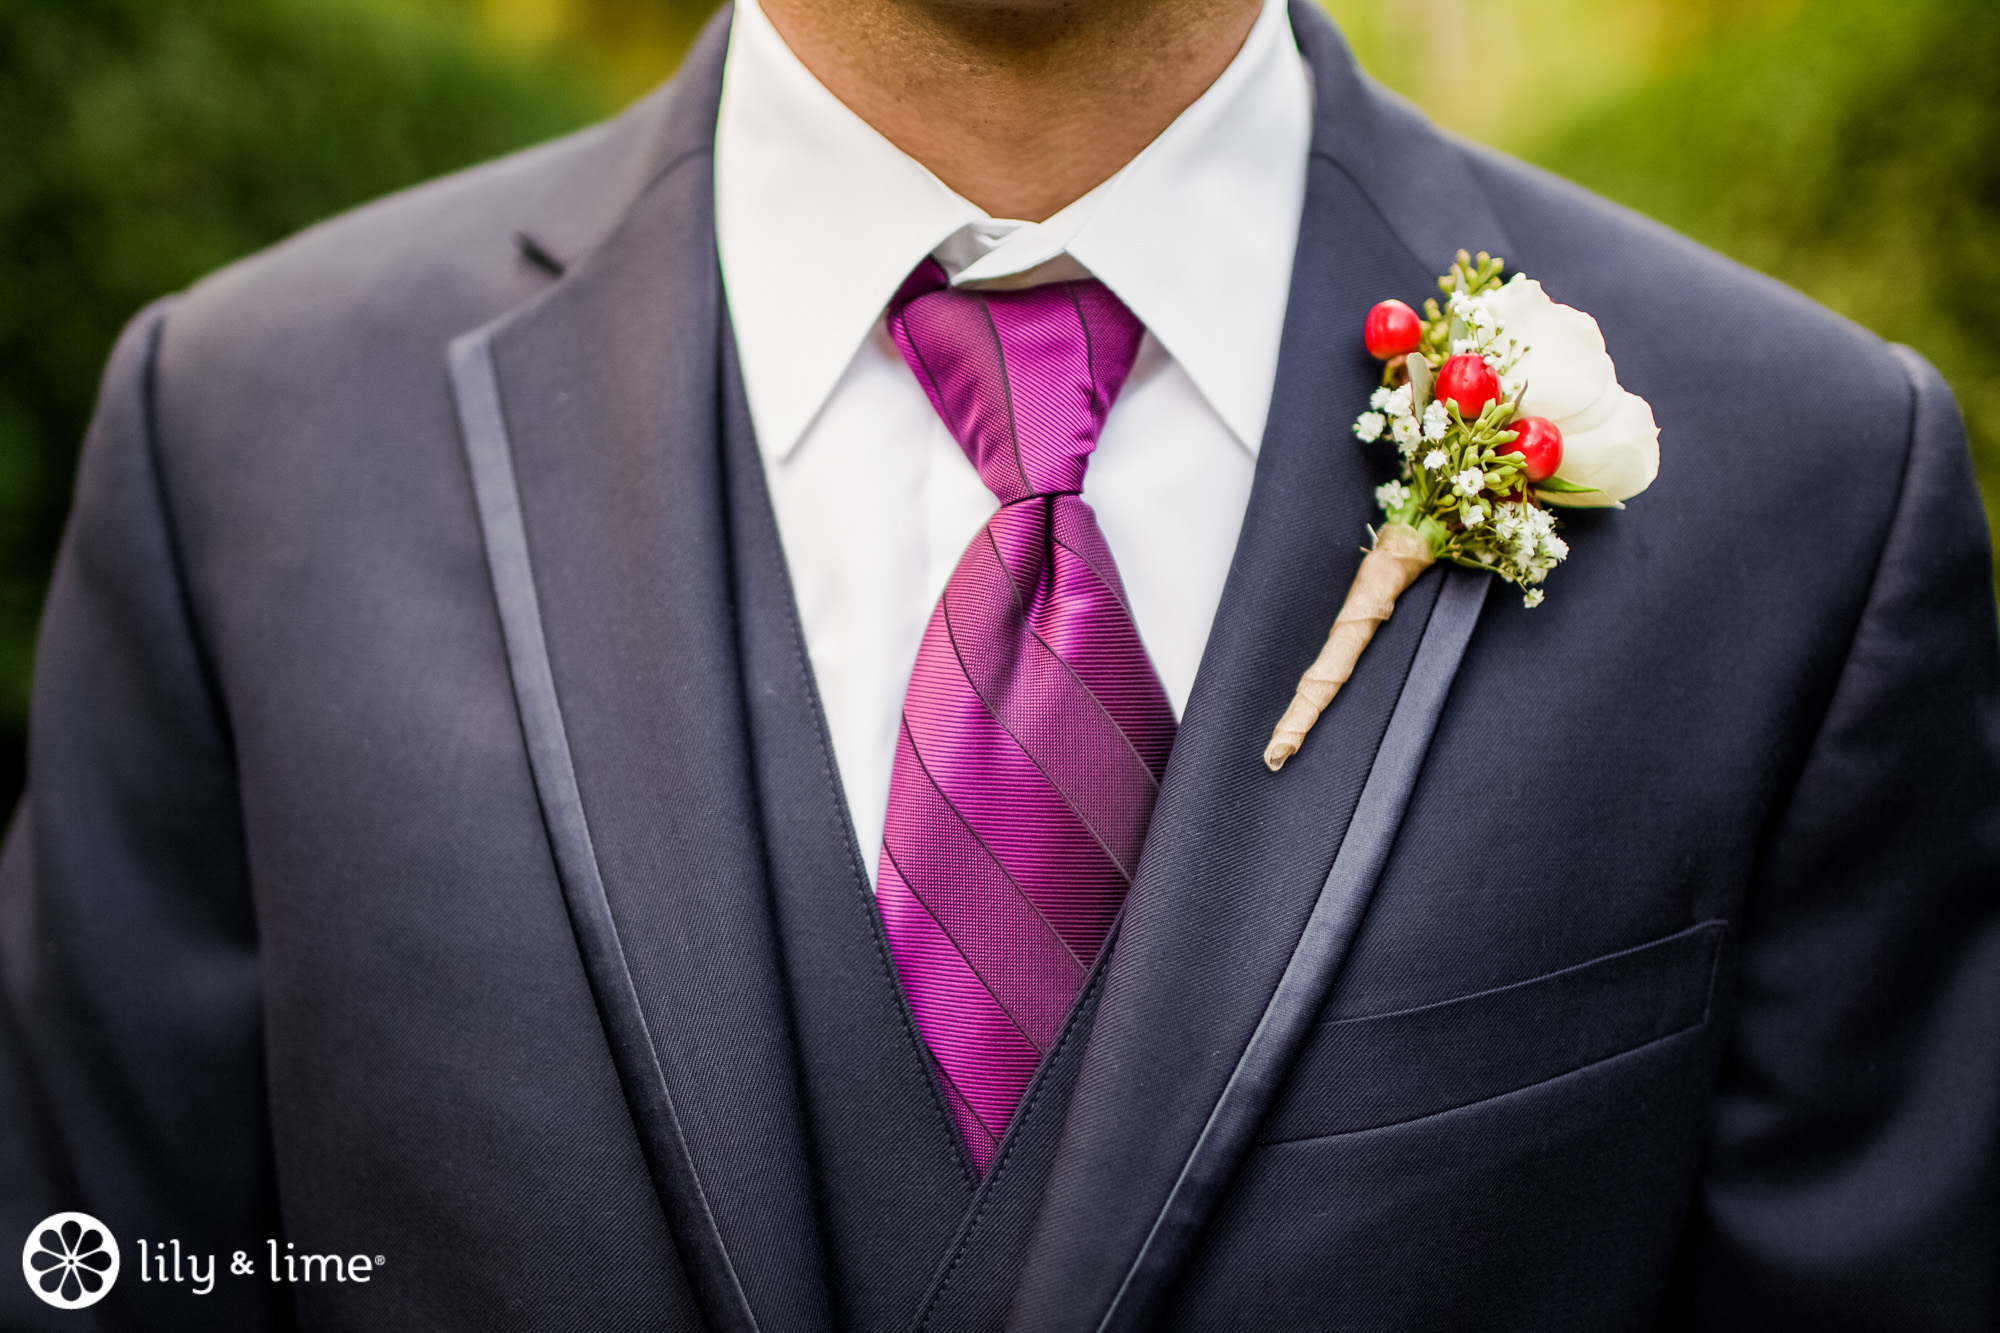 Patterned Ties for Grooms | Lily & Lime